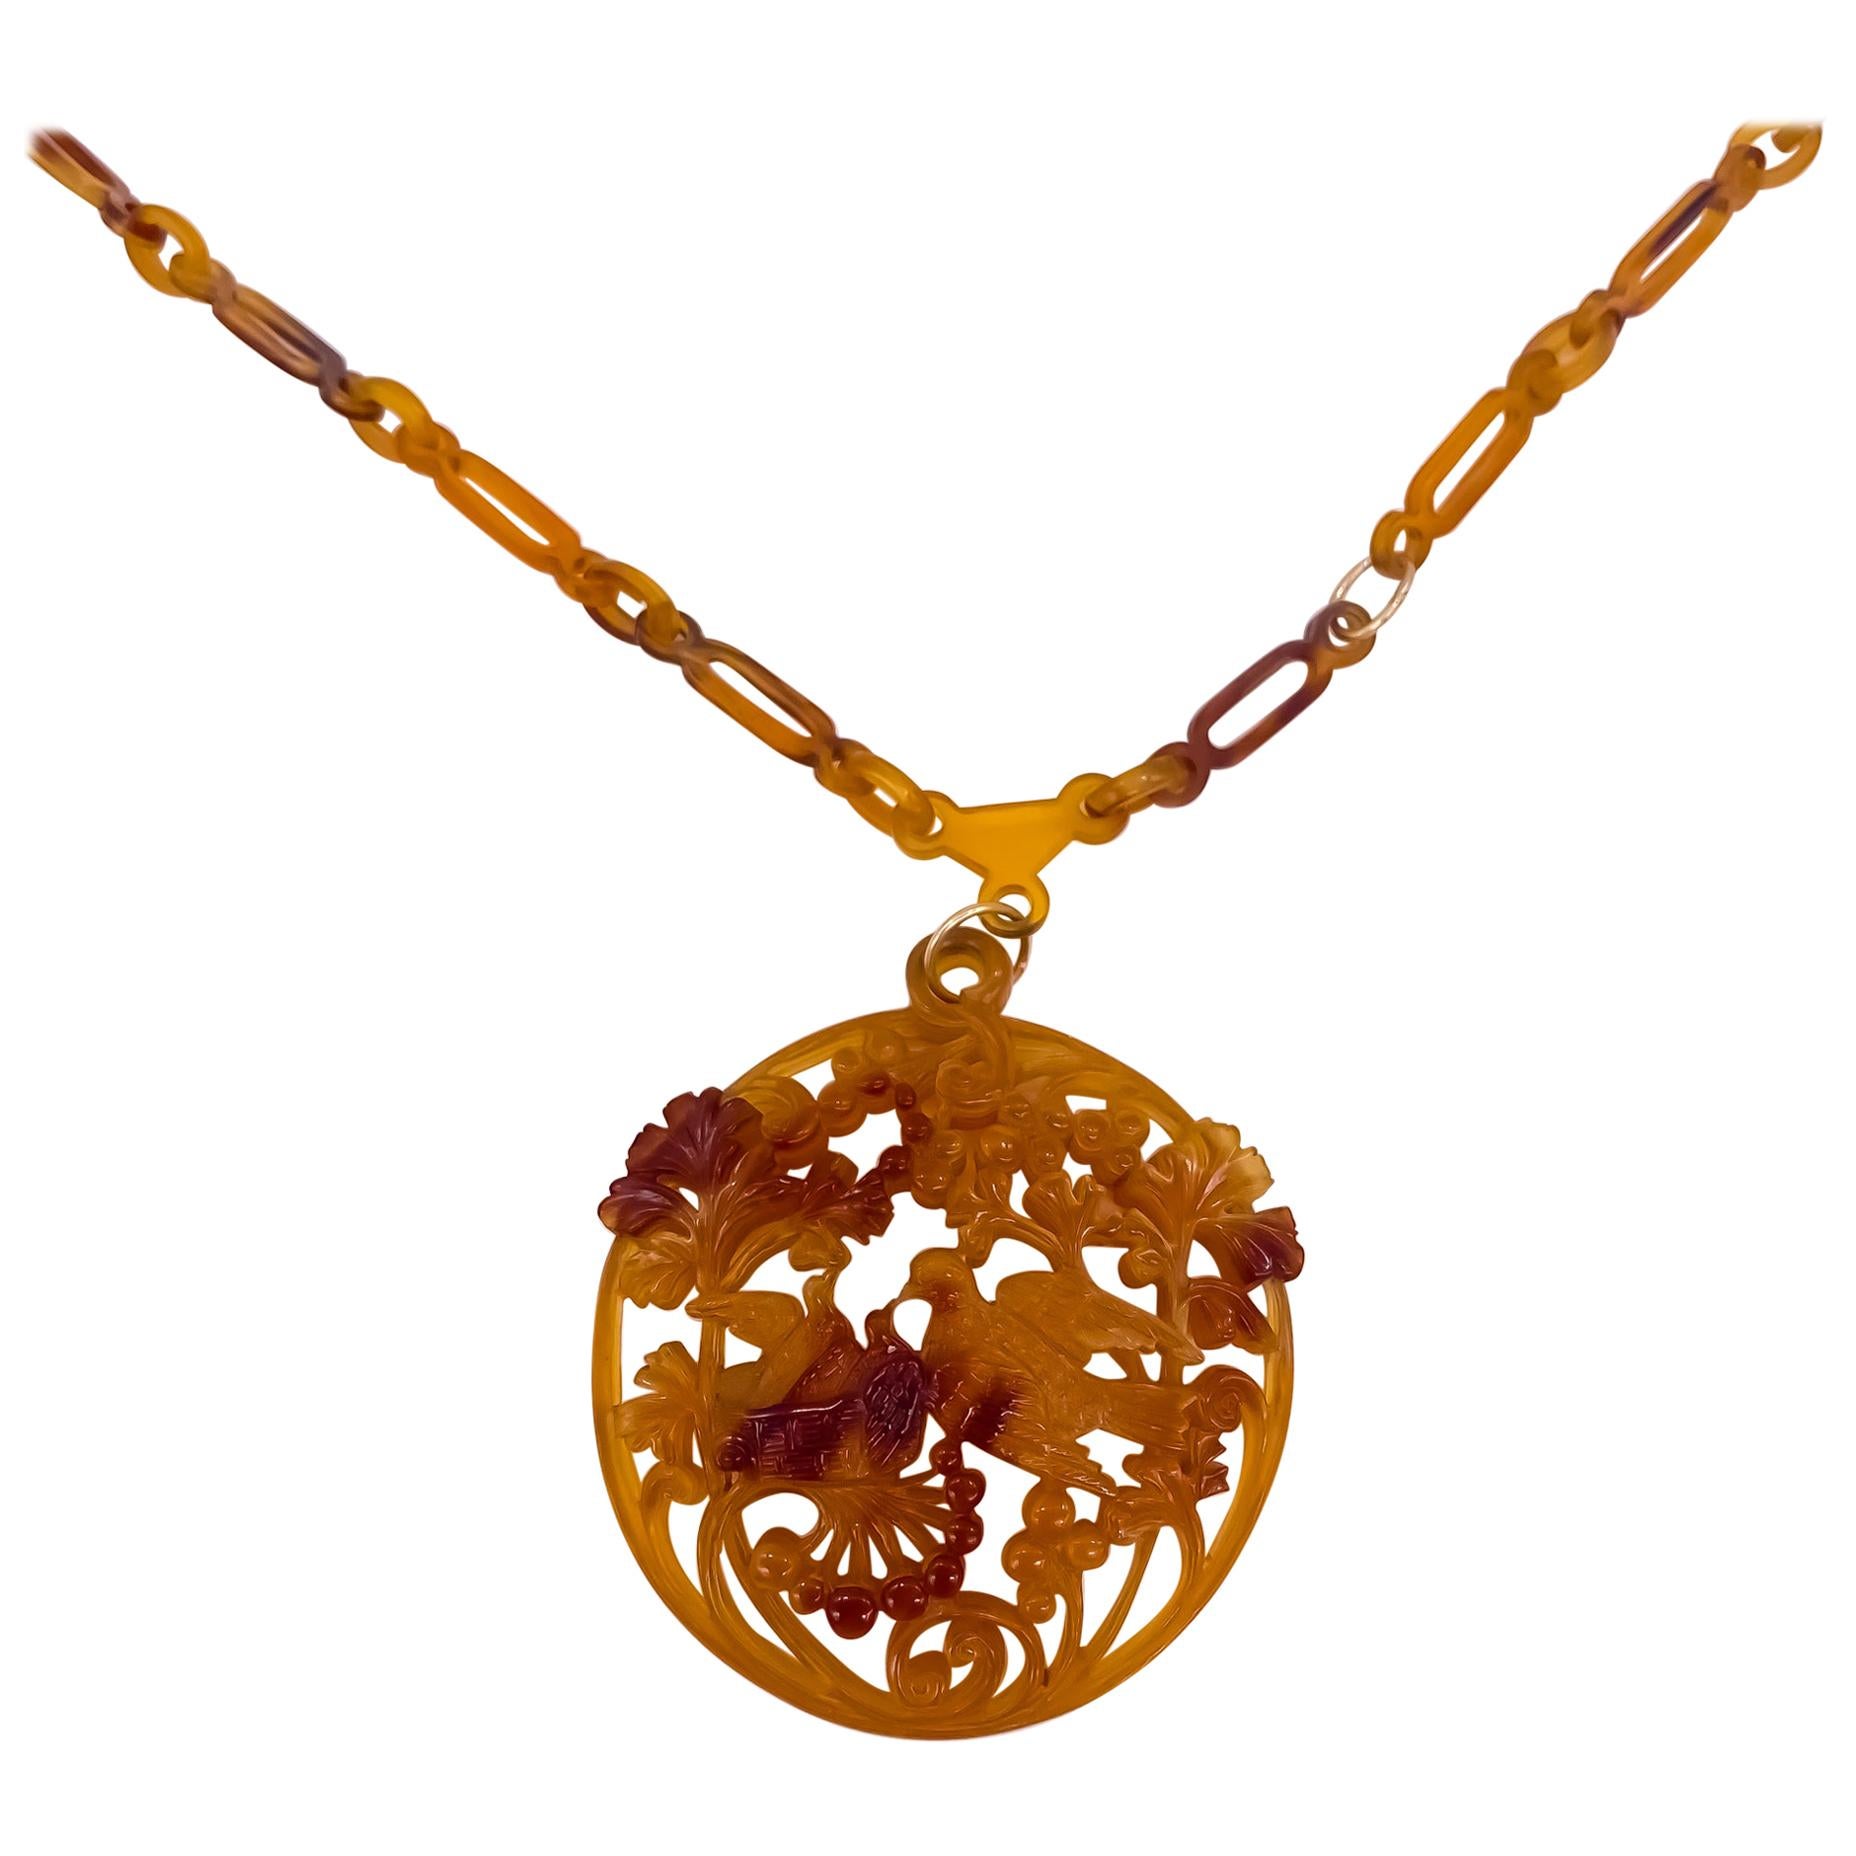 Celluloid Crafted Necklace Circa 1900 w/ 14K Gold 